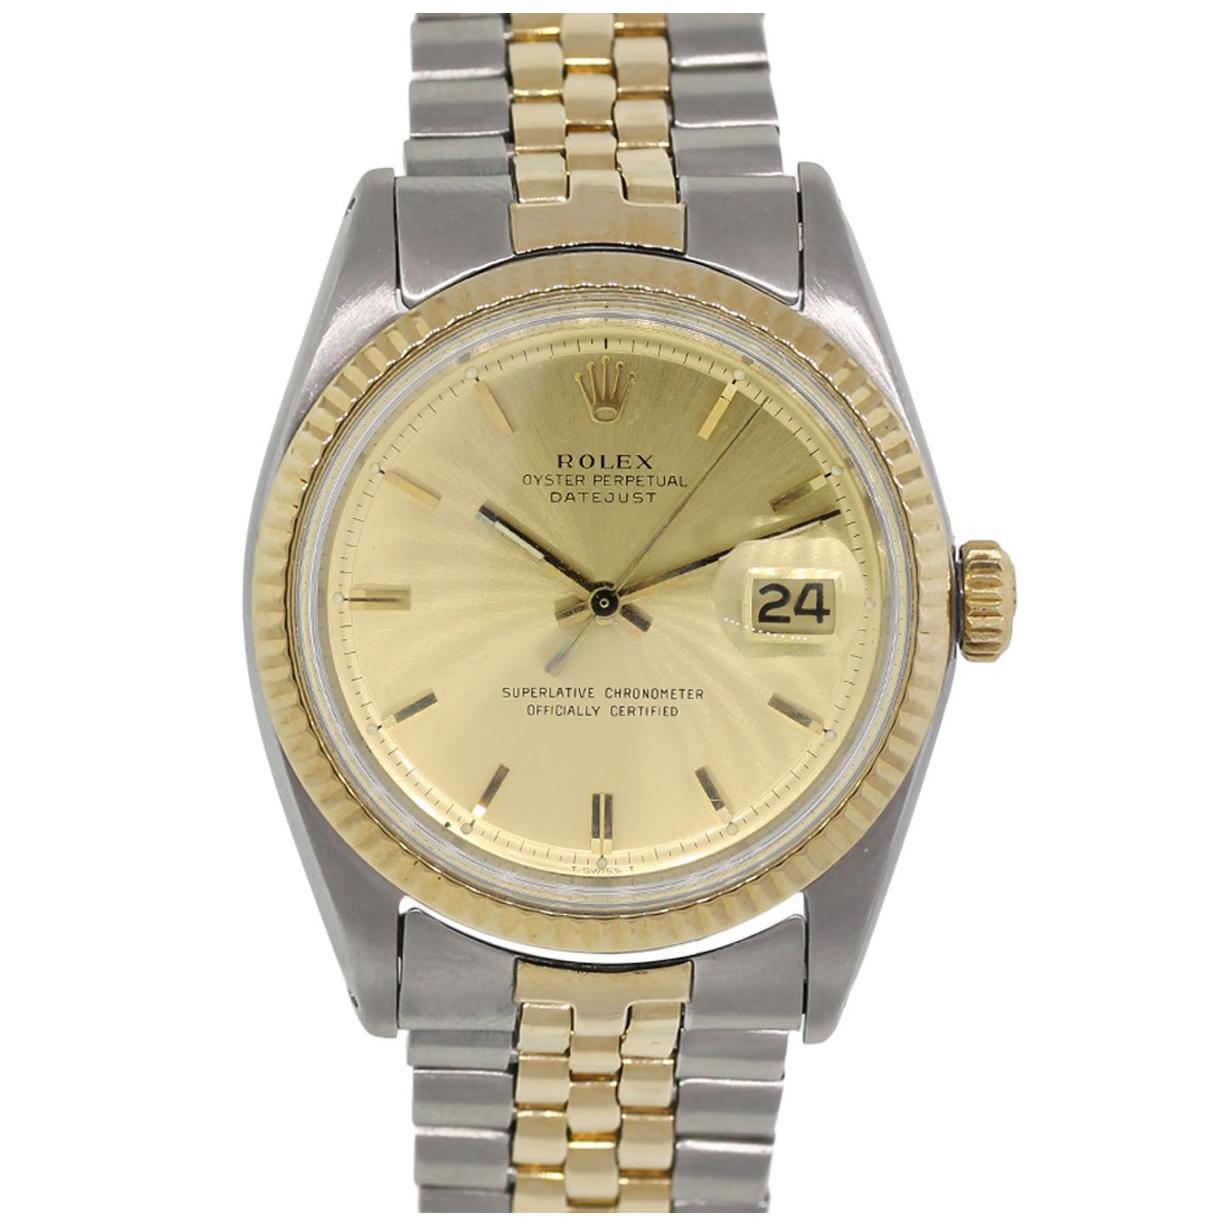 Rolex Yellow Gold Stainless Steel Datejust Automatic Wristwatch Ref 1601